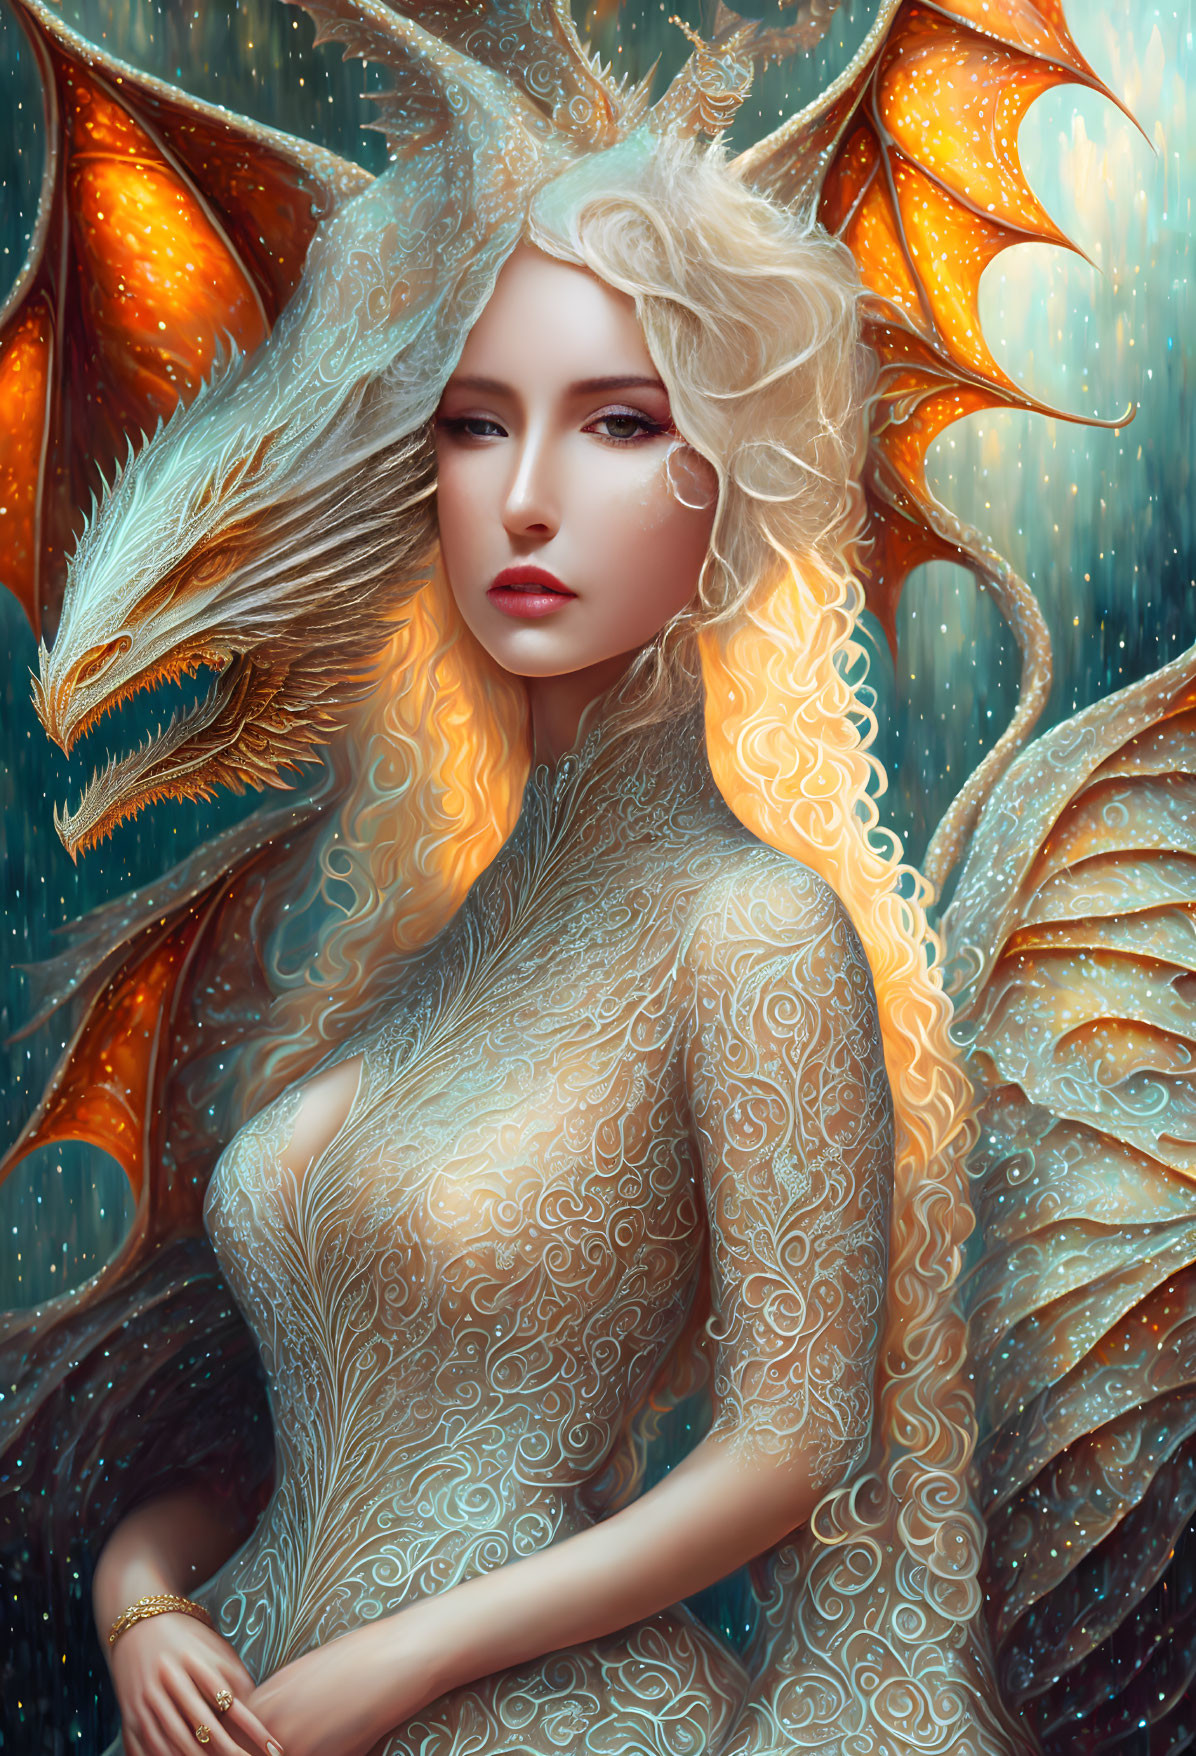 Digital artwork featuring person with dragon features: ornate scales, wings, dragon head, golden hair.